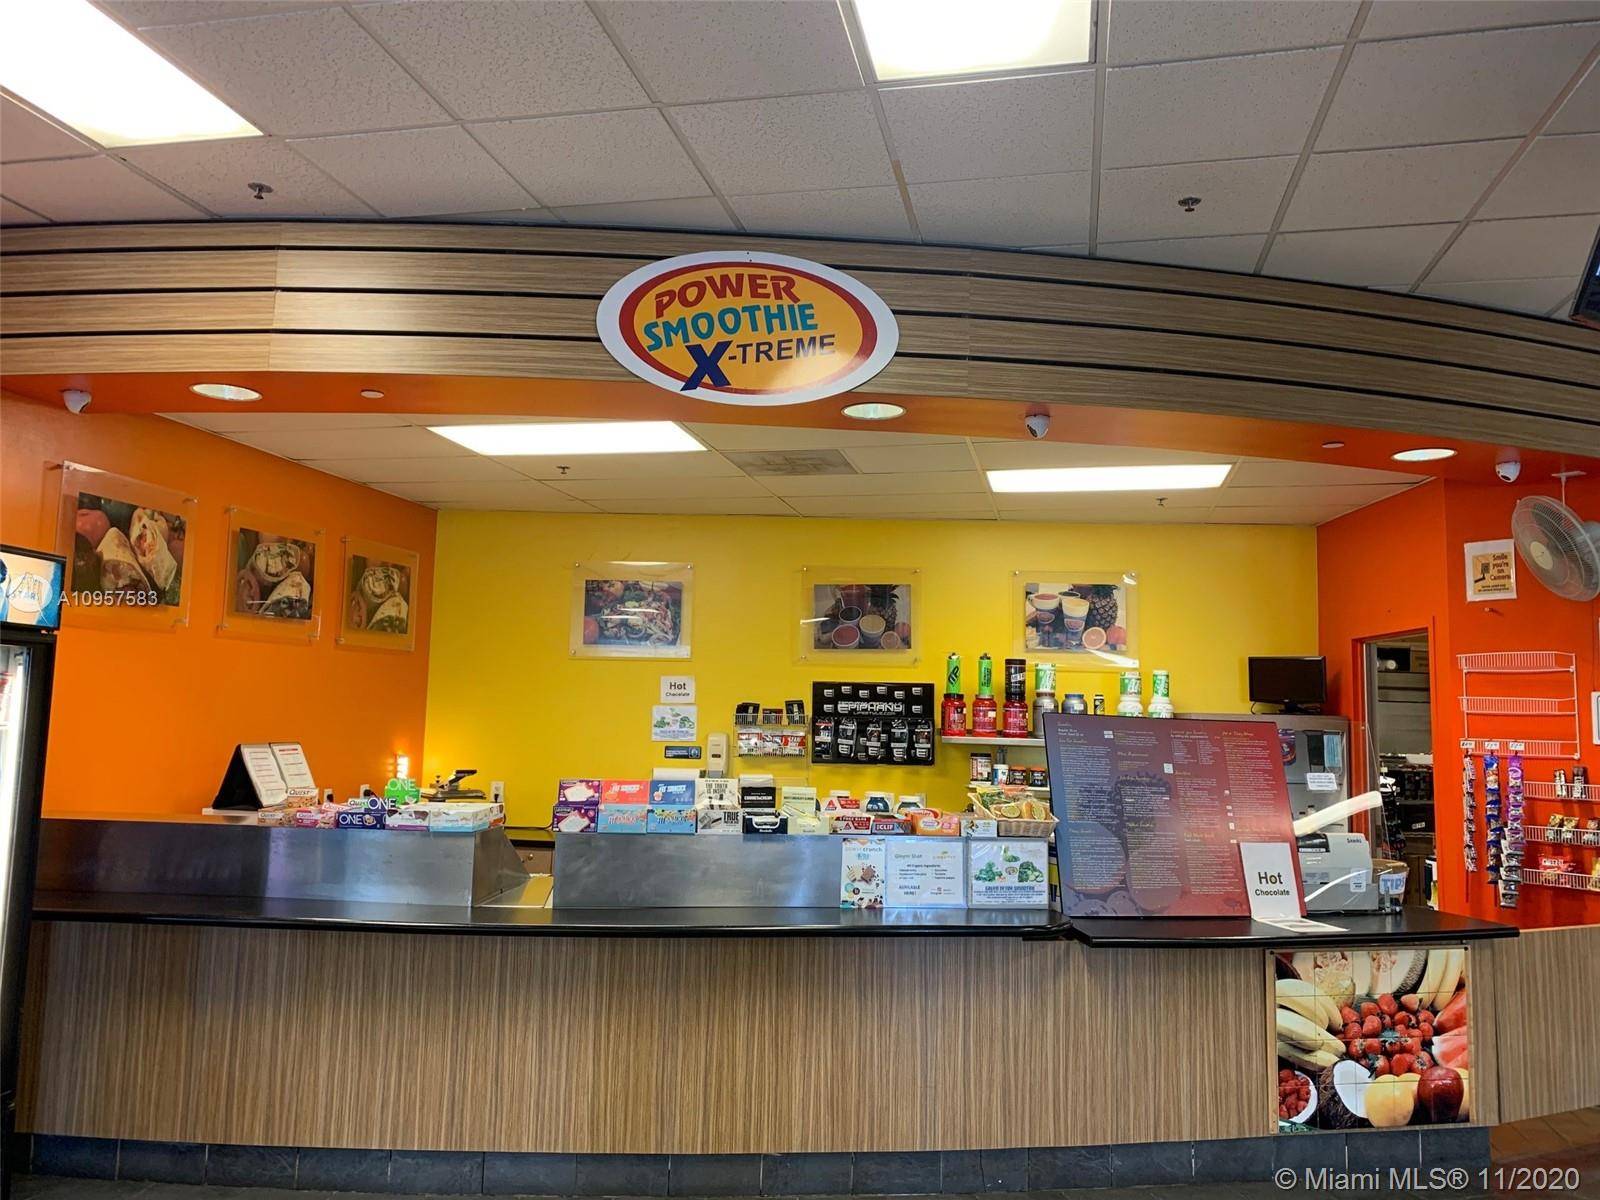 Smoothie Snack bar for sale inside the LA Fitness Gym located in Sunset Place.